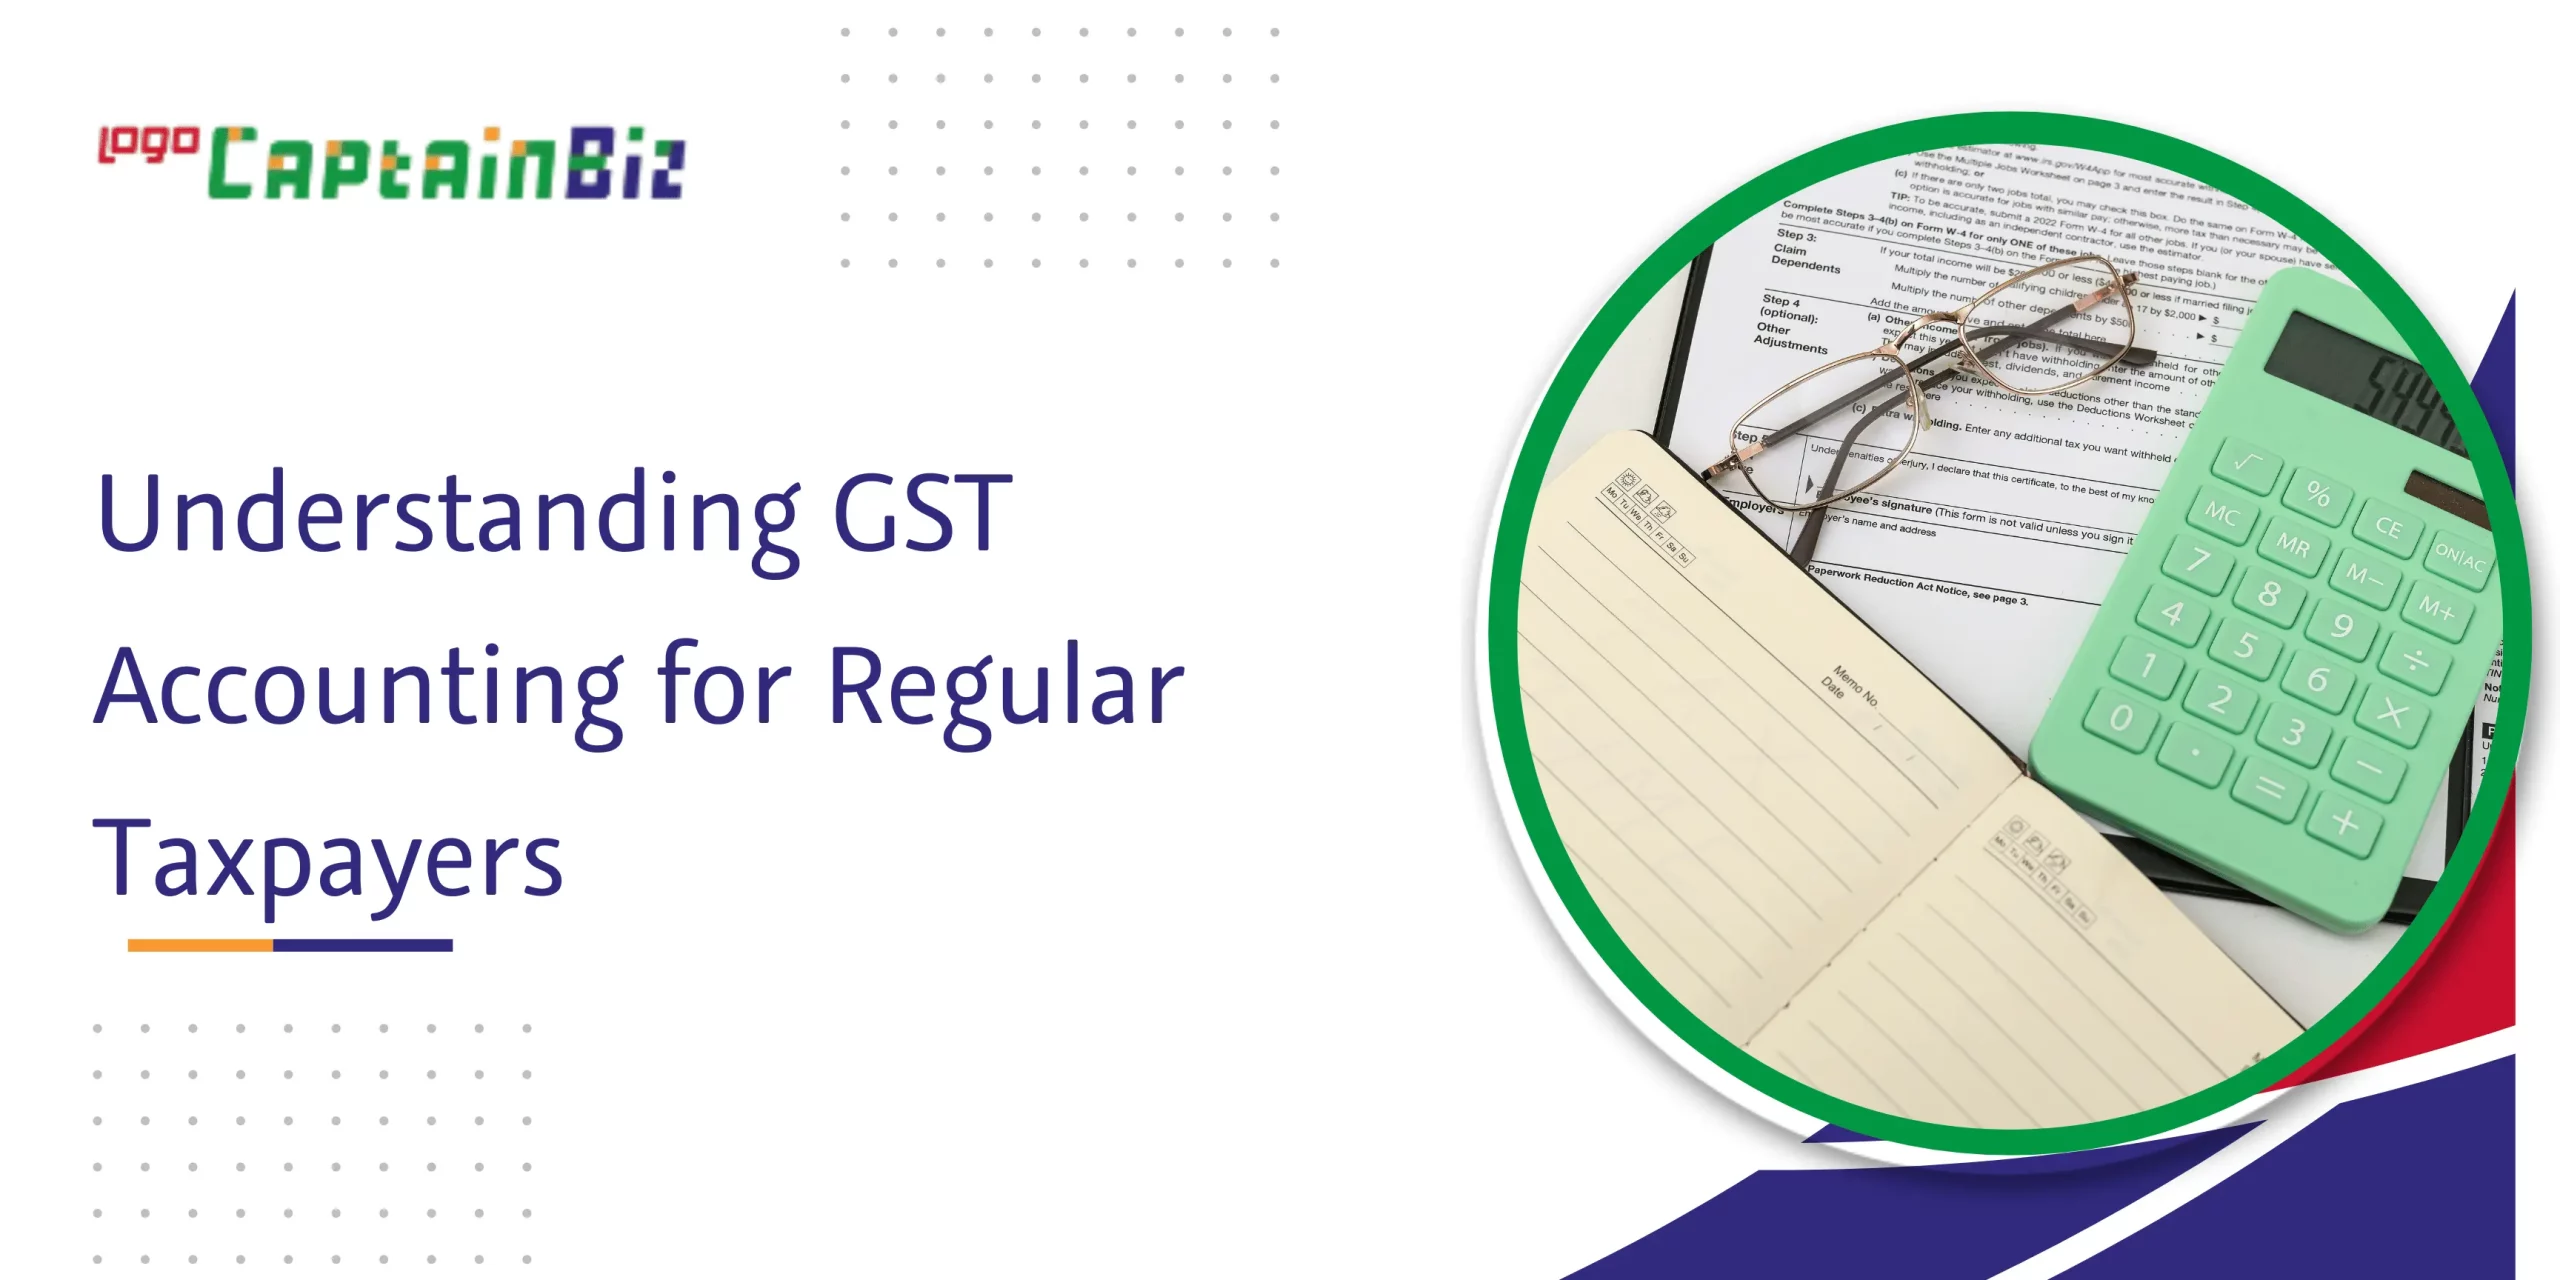 CaptainBiz: understanding gst accounting for regular taxpayers